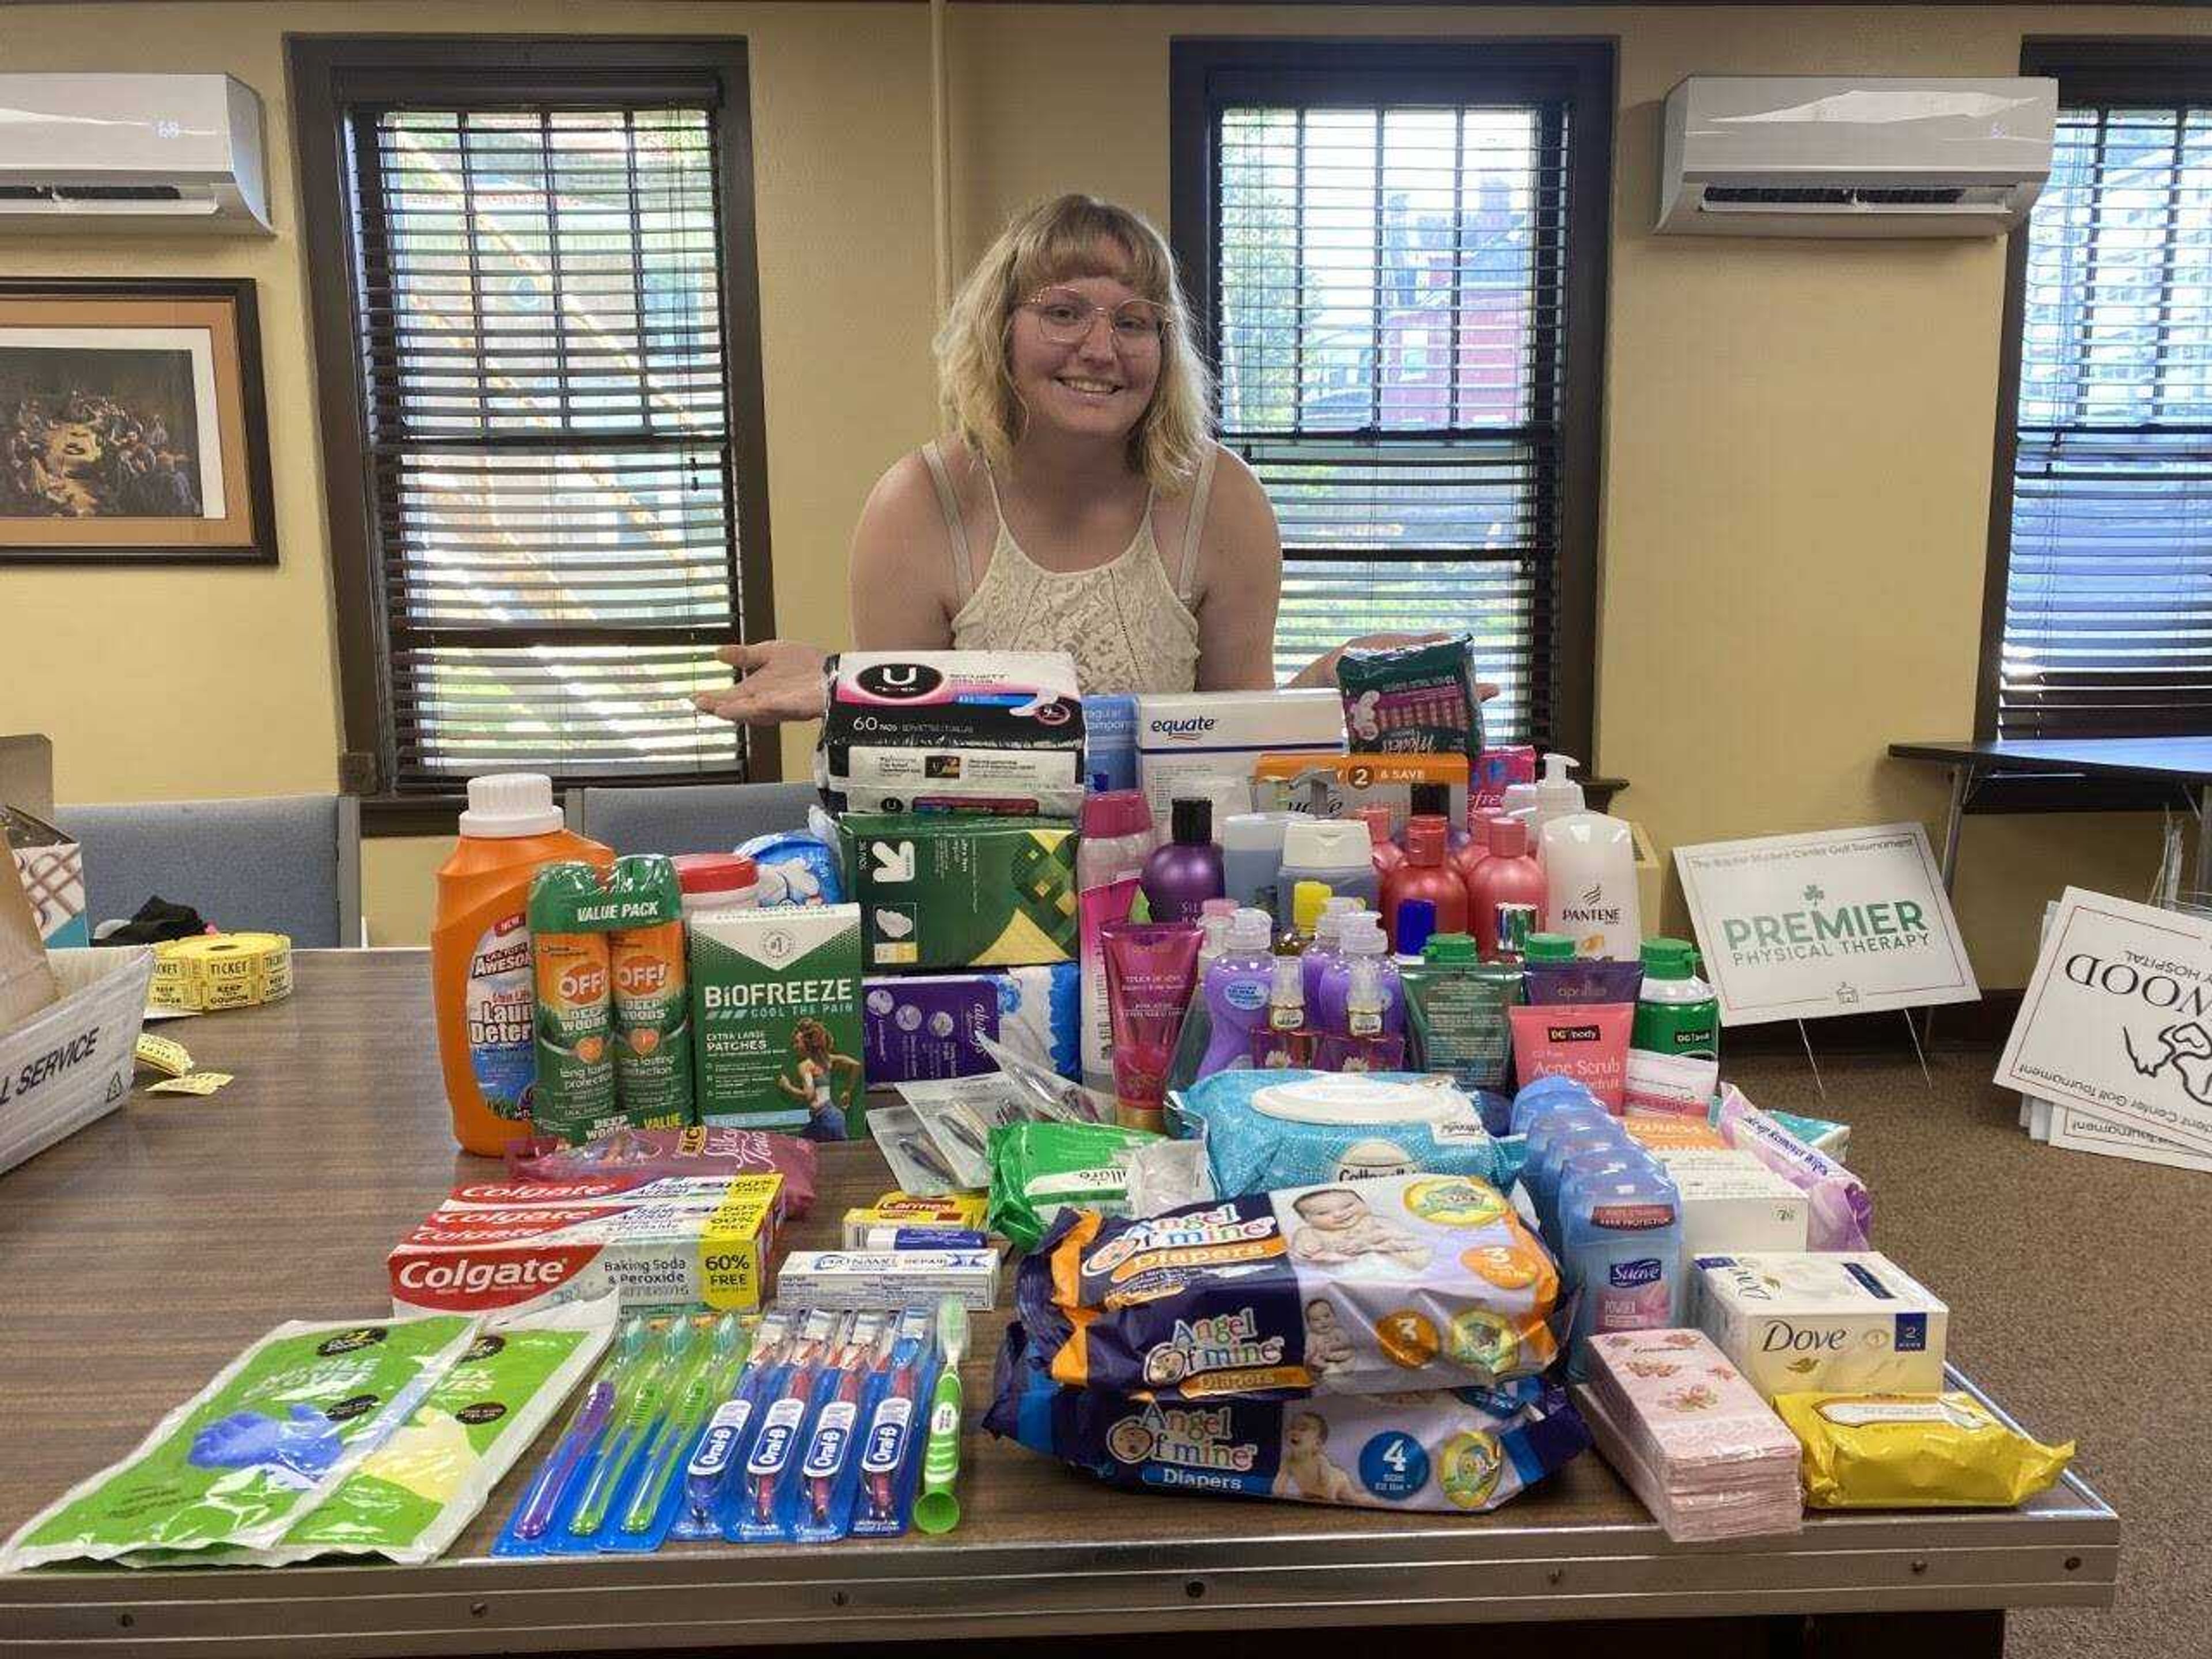 Southeast student Breah Rennie, member of Planned Parenthood Action SEMO, poses with hygiene products the group collected to donate to Safe House for Women in Cape Girardeau on May 6. The group collected 650 pads and tampons, 37 bottles of shampoo, conditioner and lotion, and more across Southeast’s campus during the month of April.